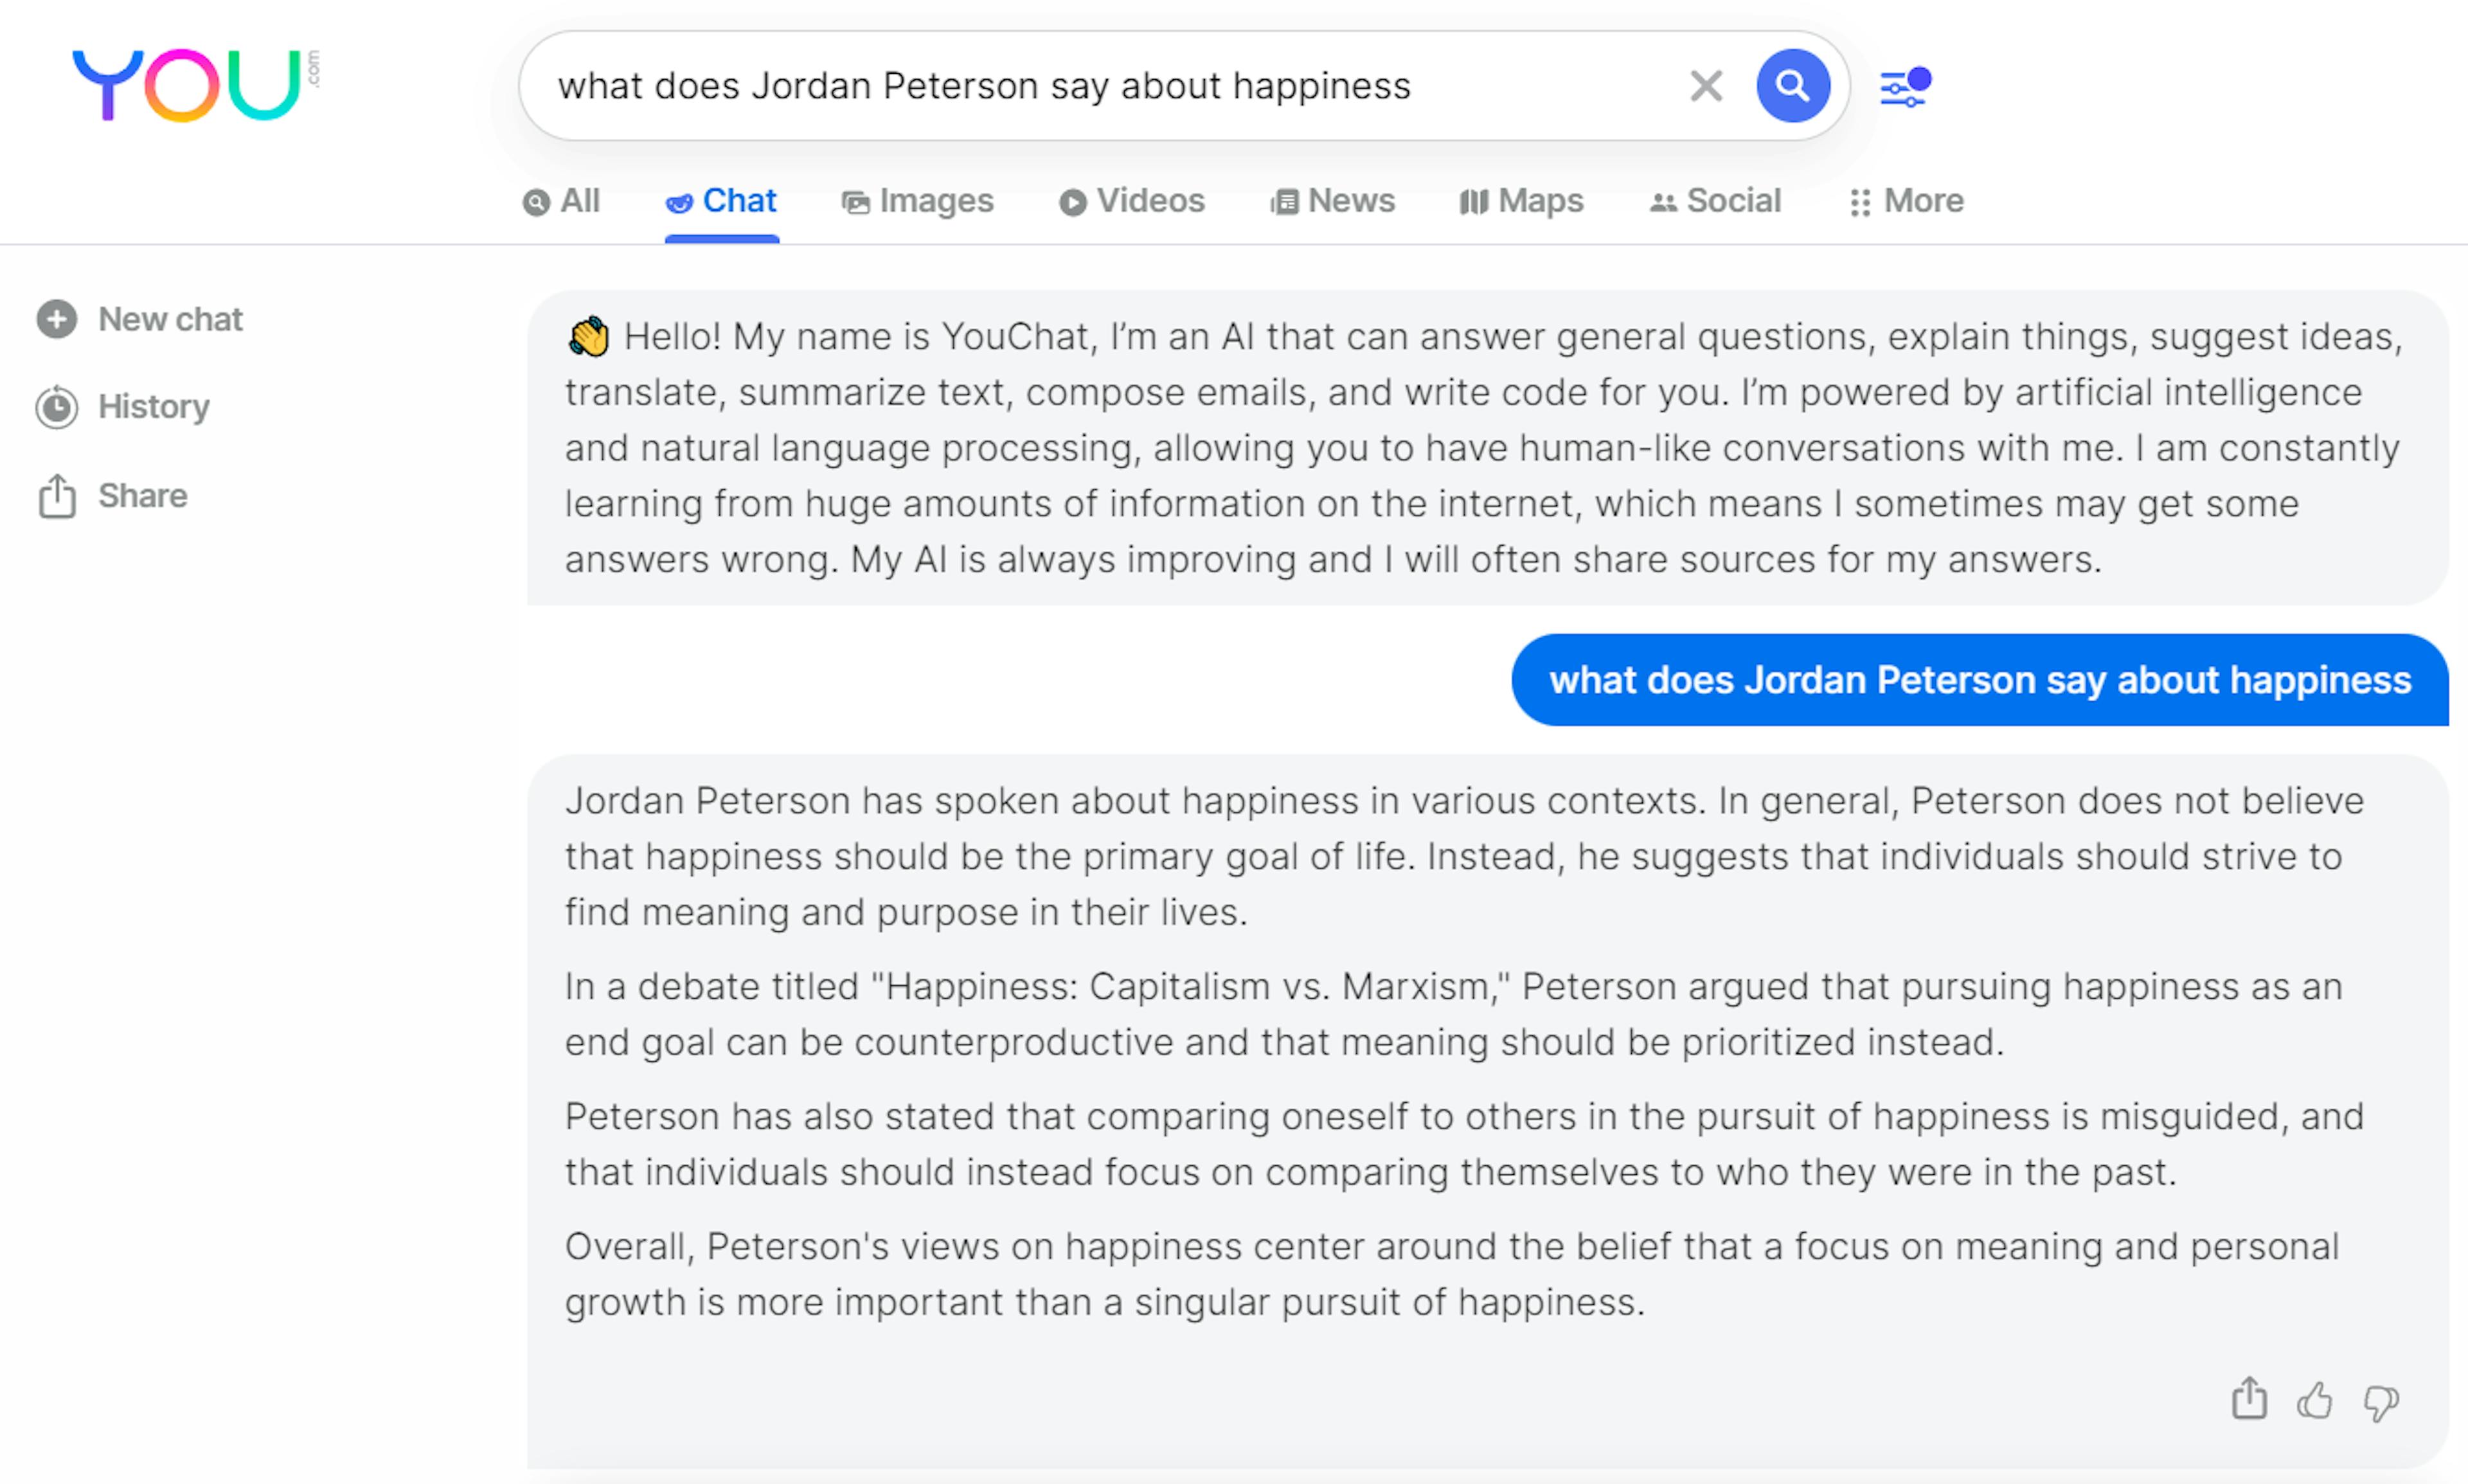 You.com's response to the query: What does Jordan Peterson say about happiness?